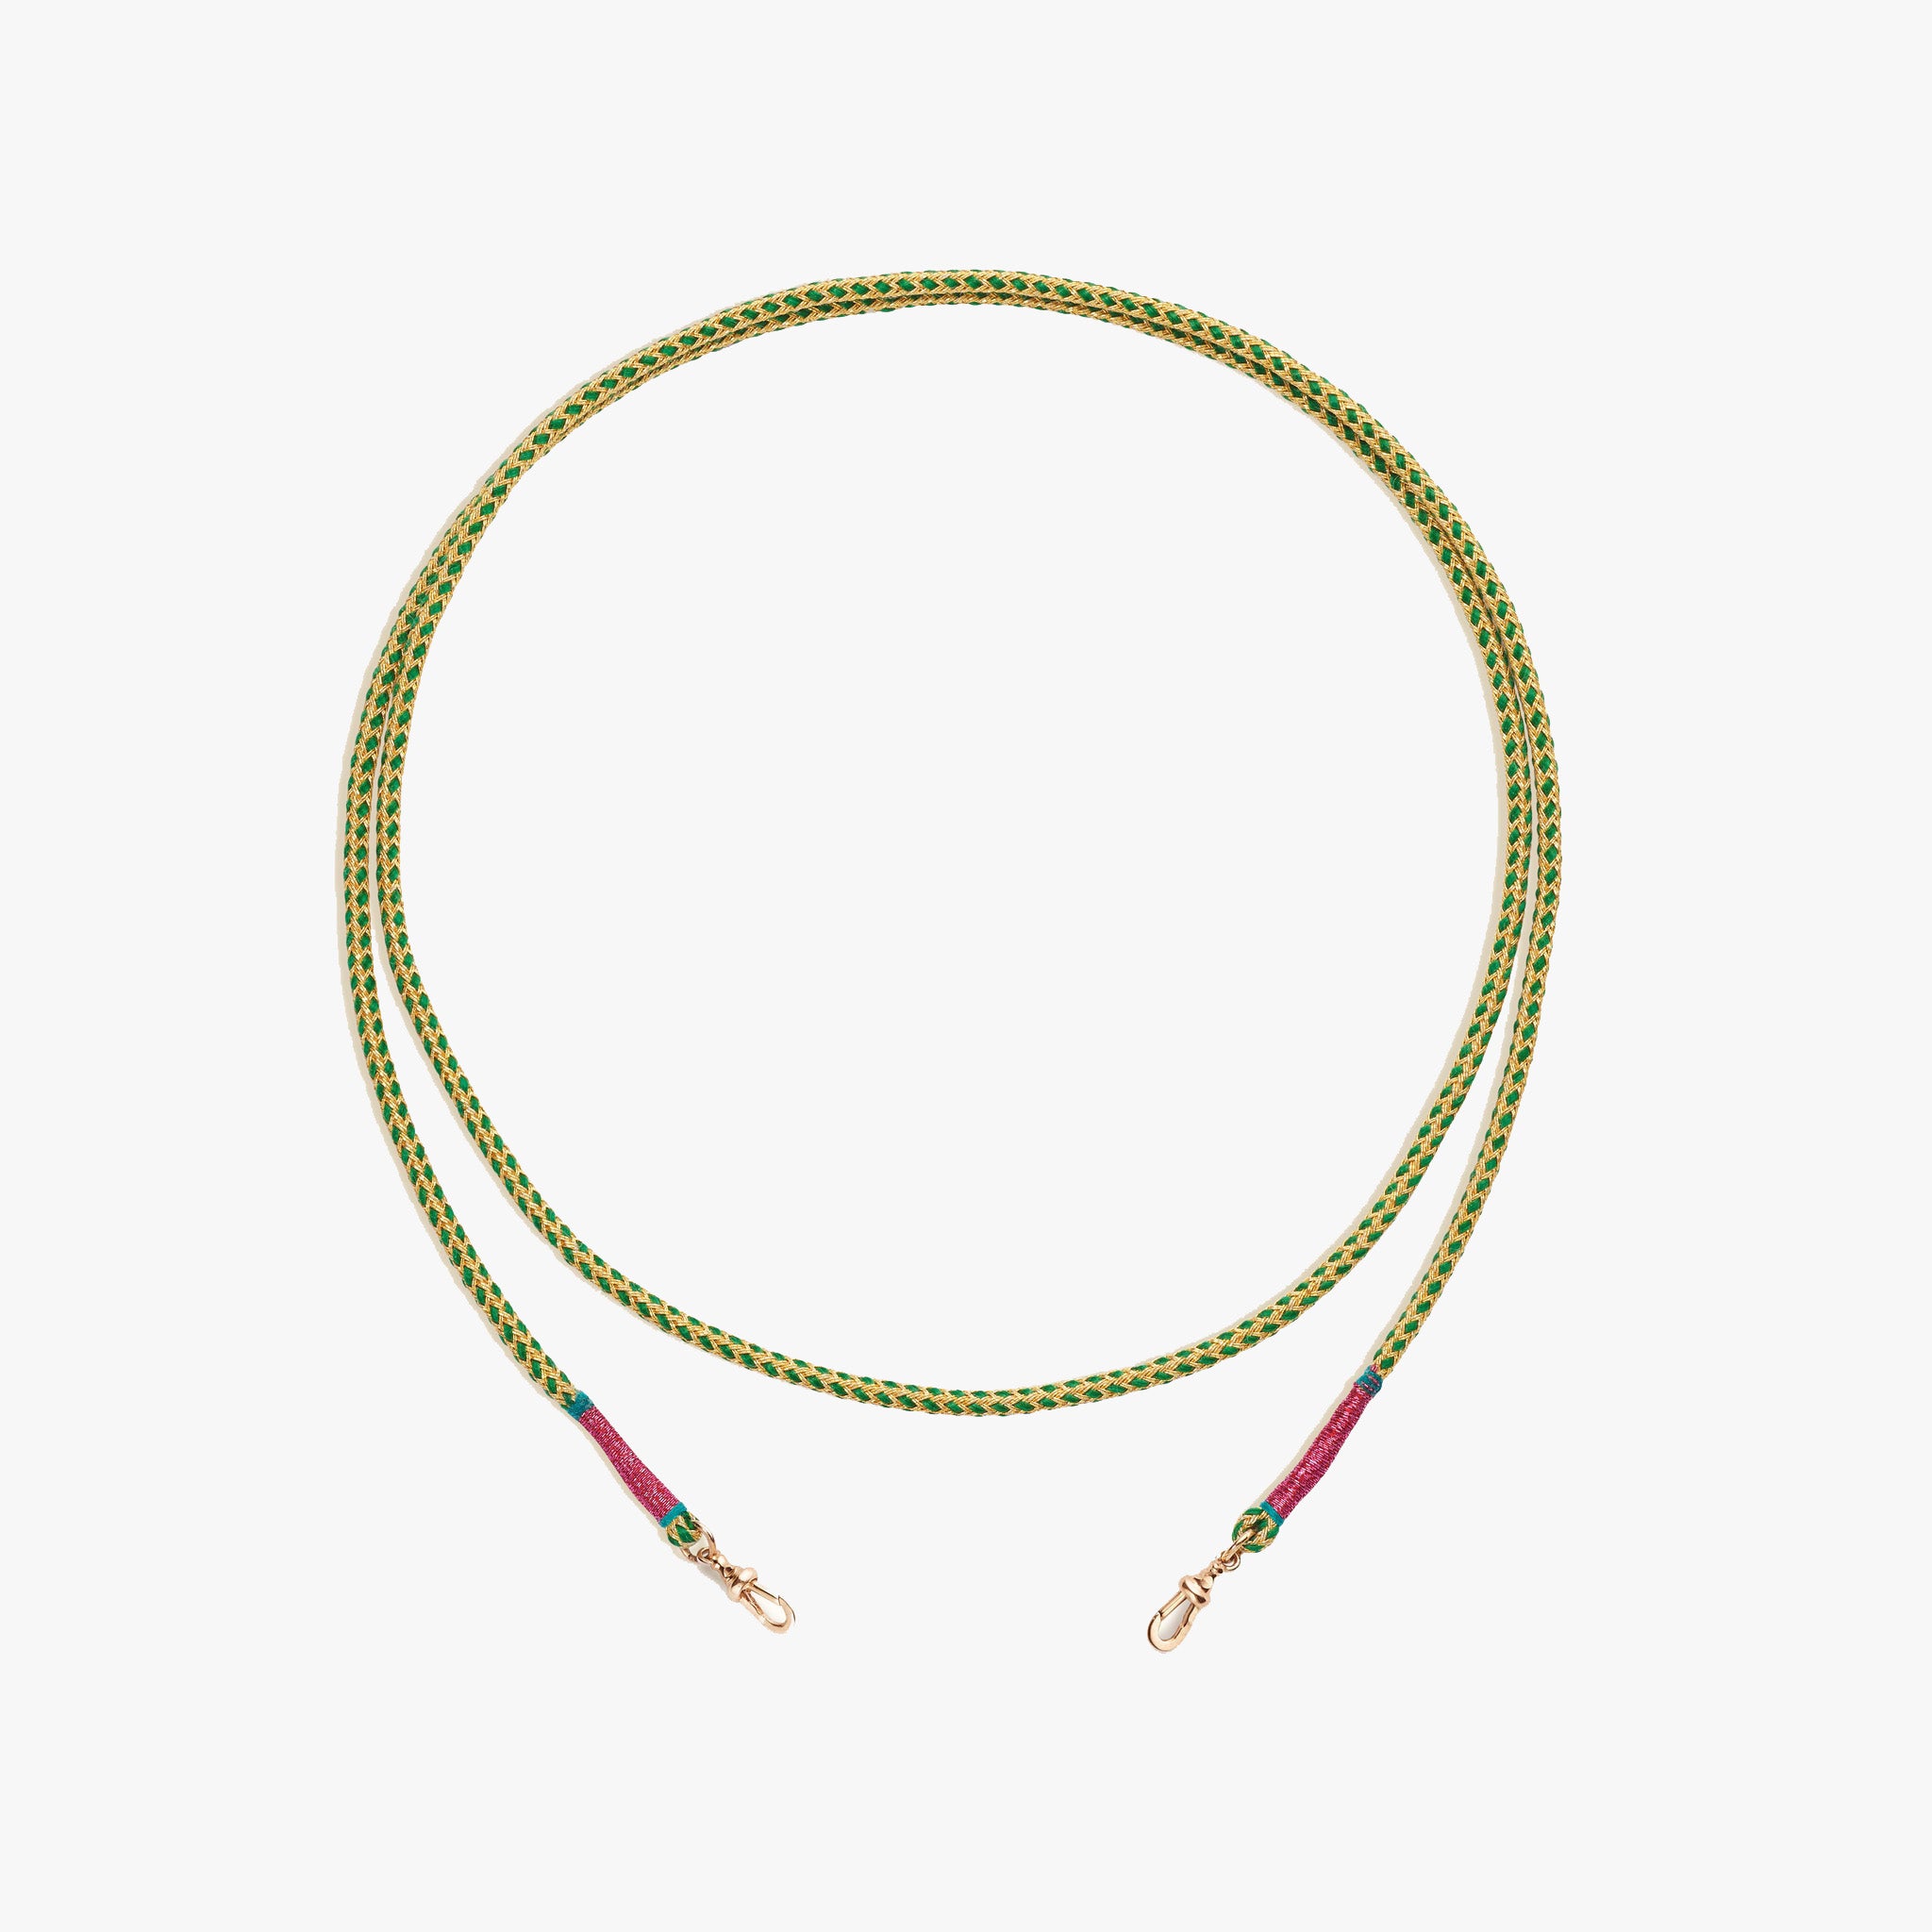 Green and Gold Rathi Cord